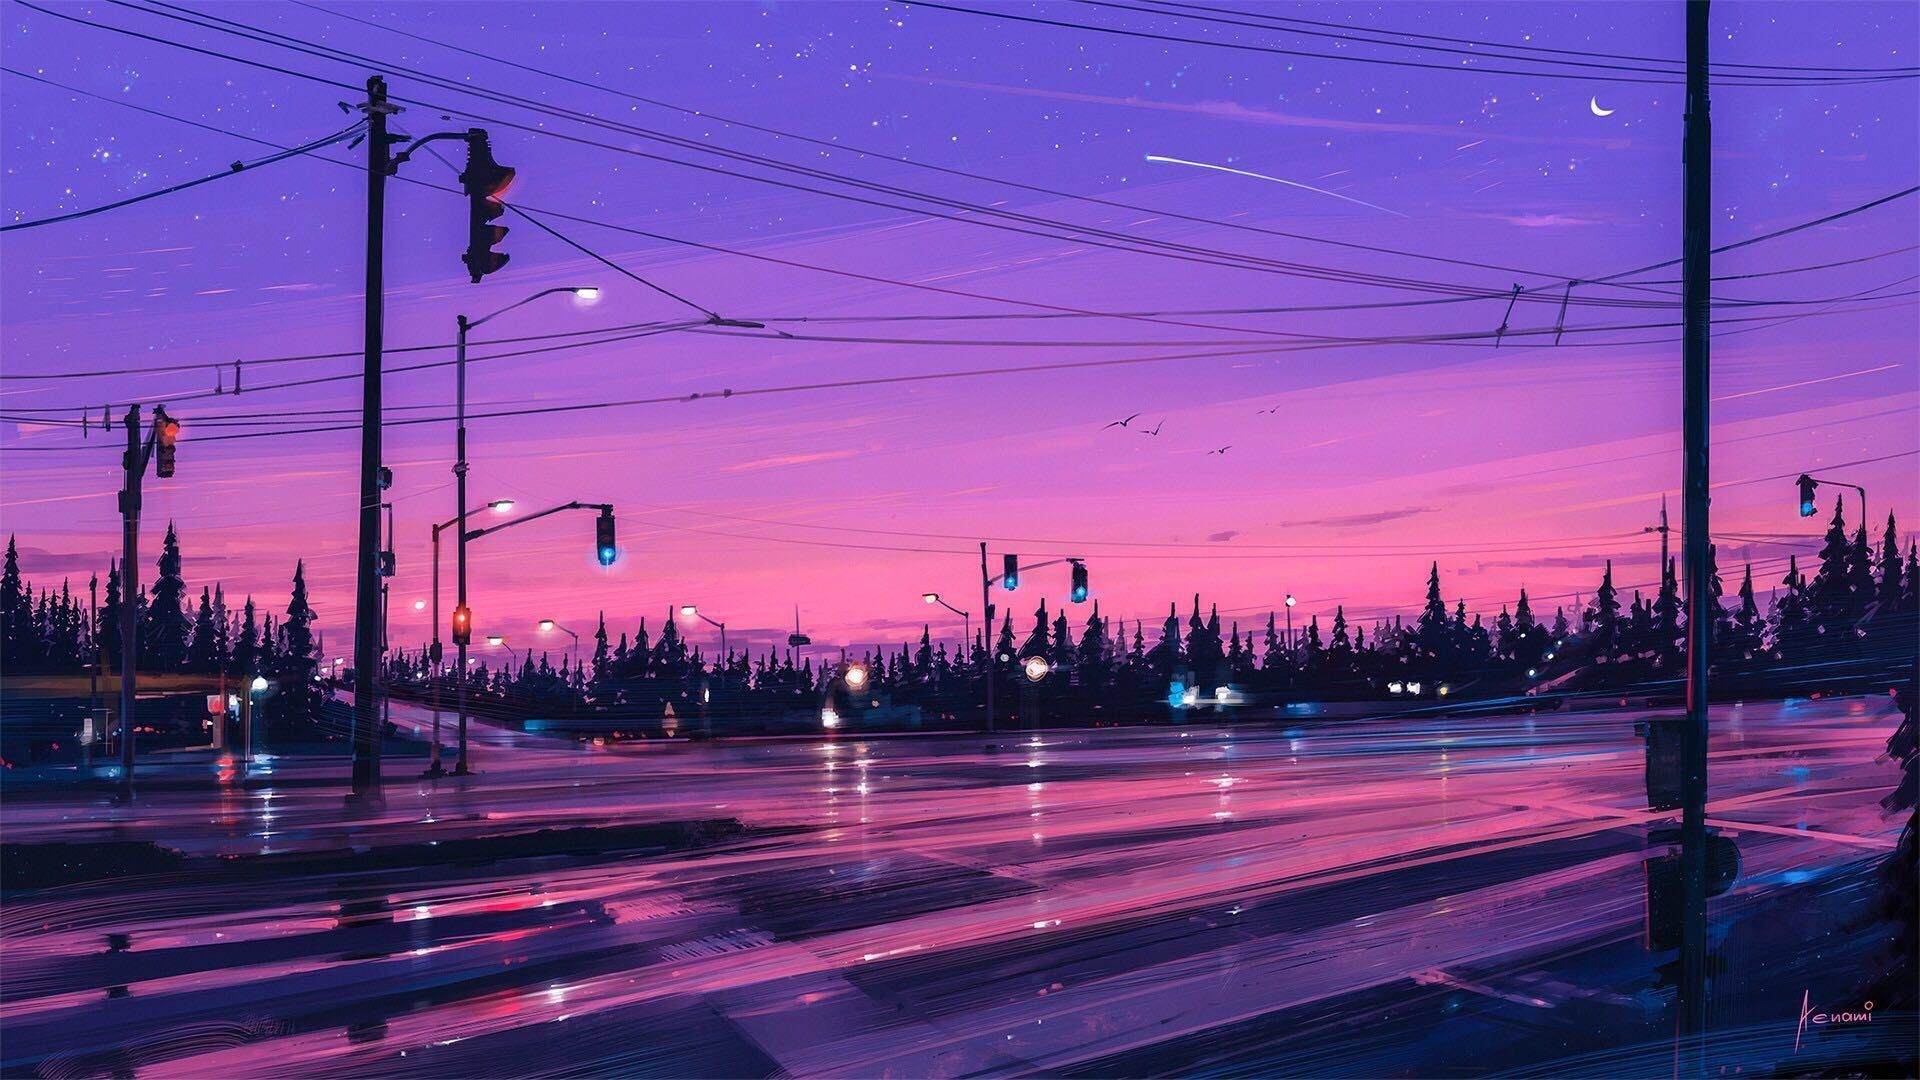 Absolutely gorgeous. Credit to Alena Aenami